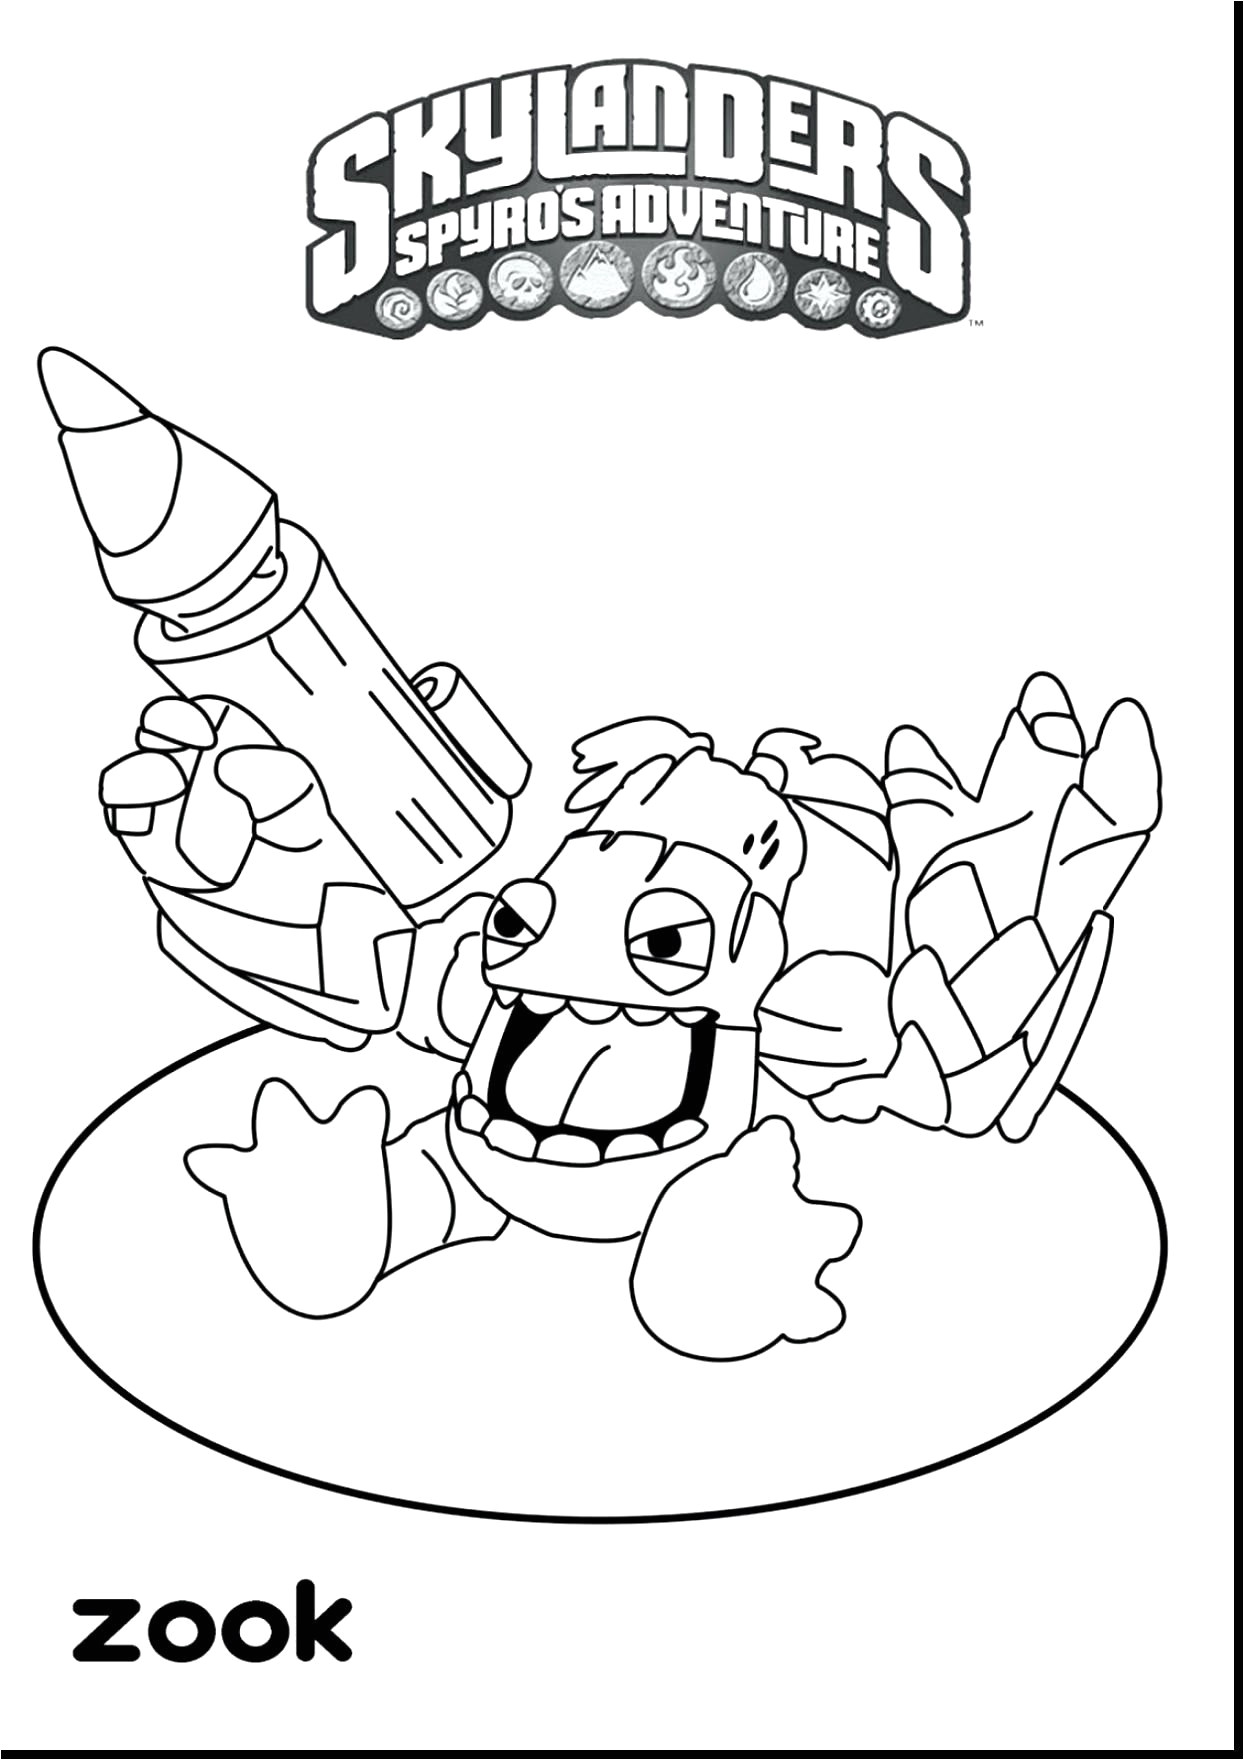 coloriage paques on site elegant ghostbusters coloriages 0d free coloring of de fee a im